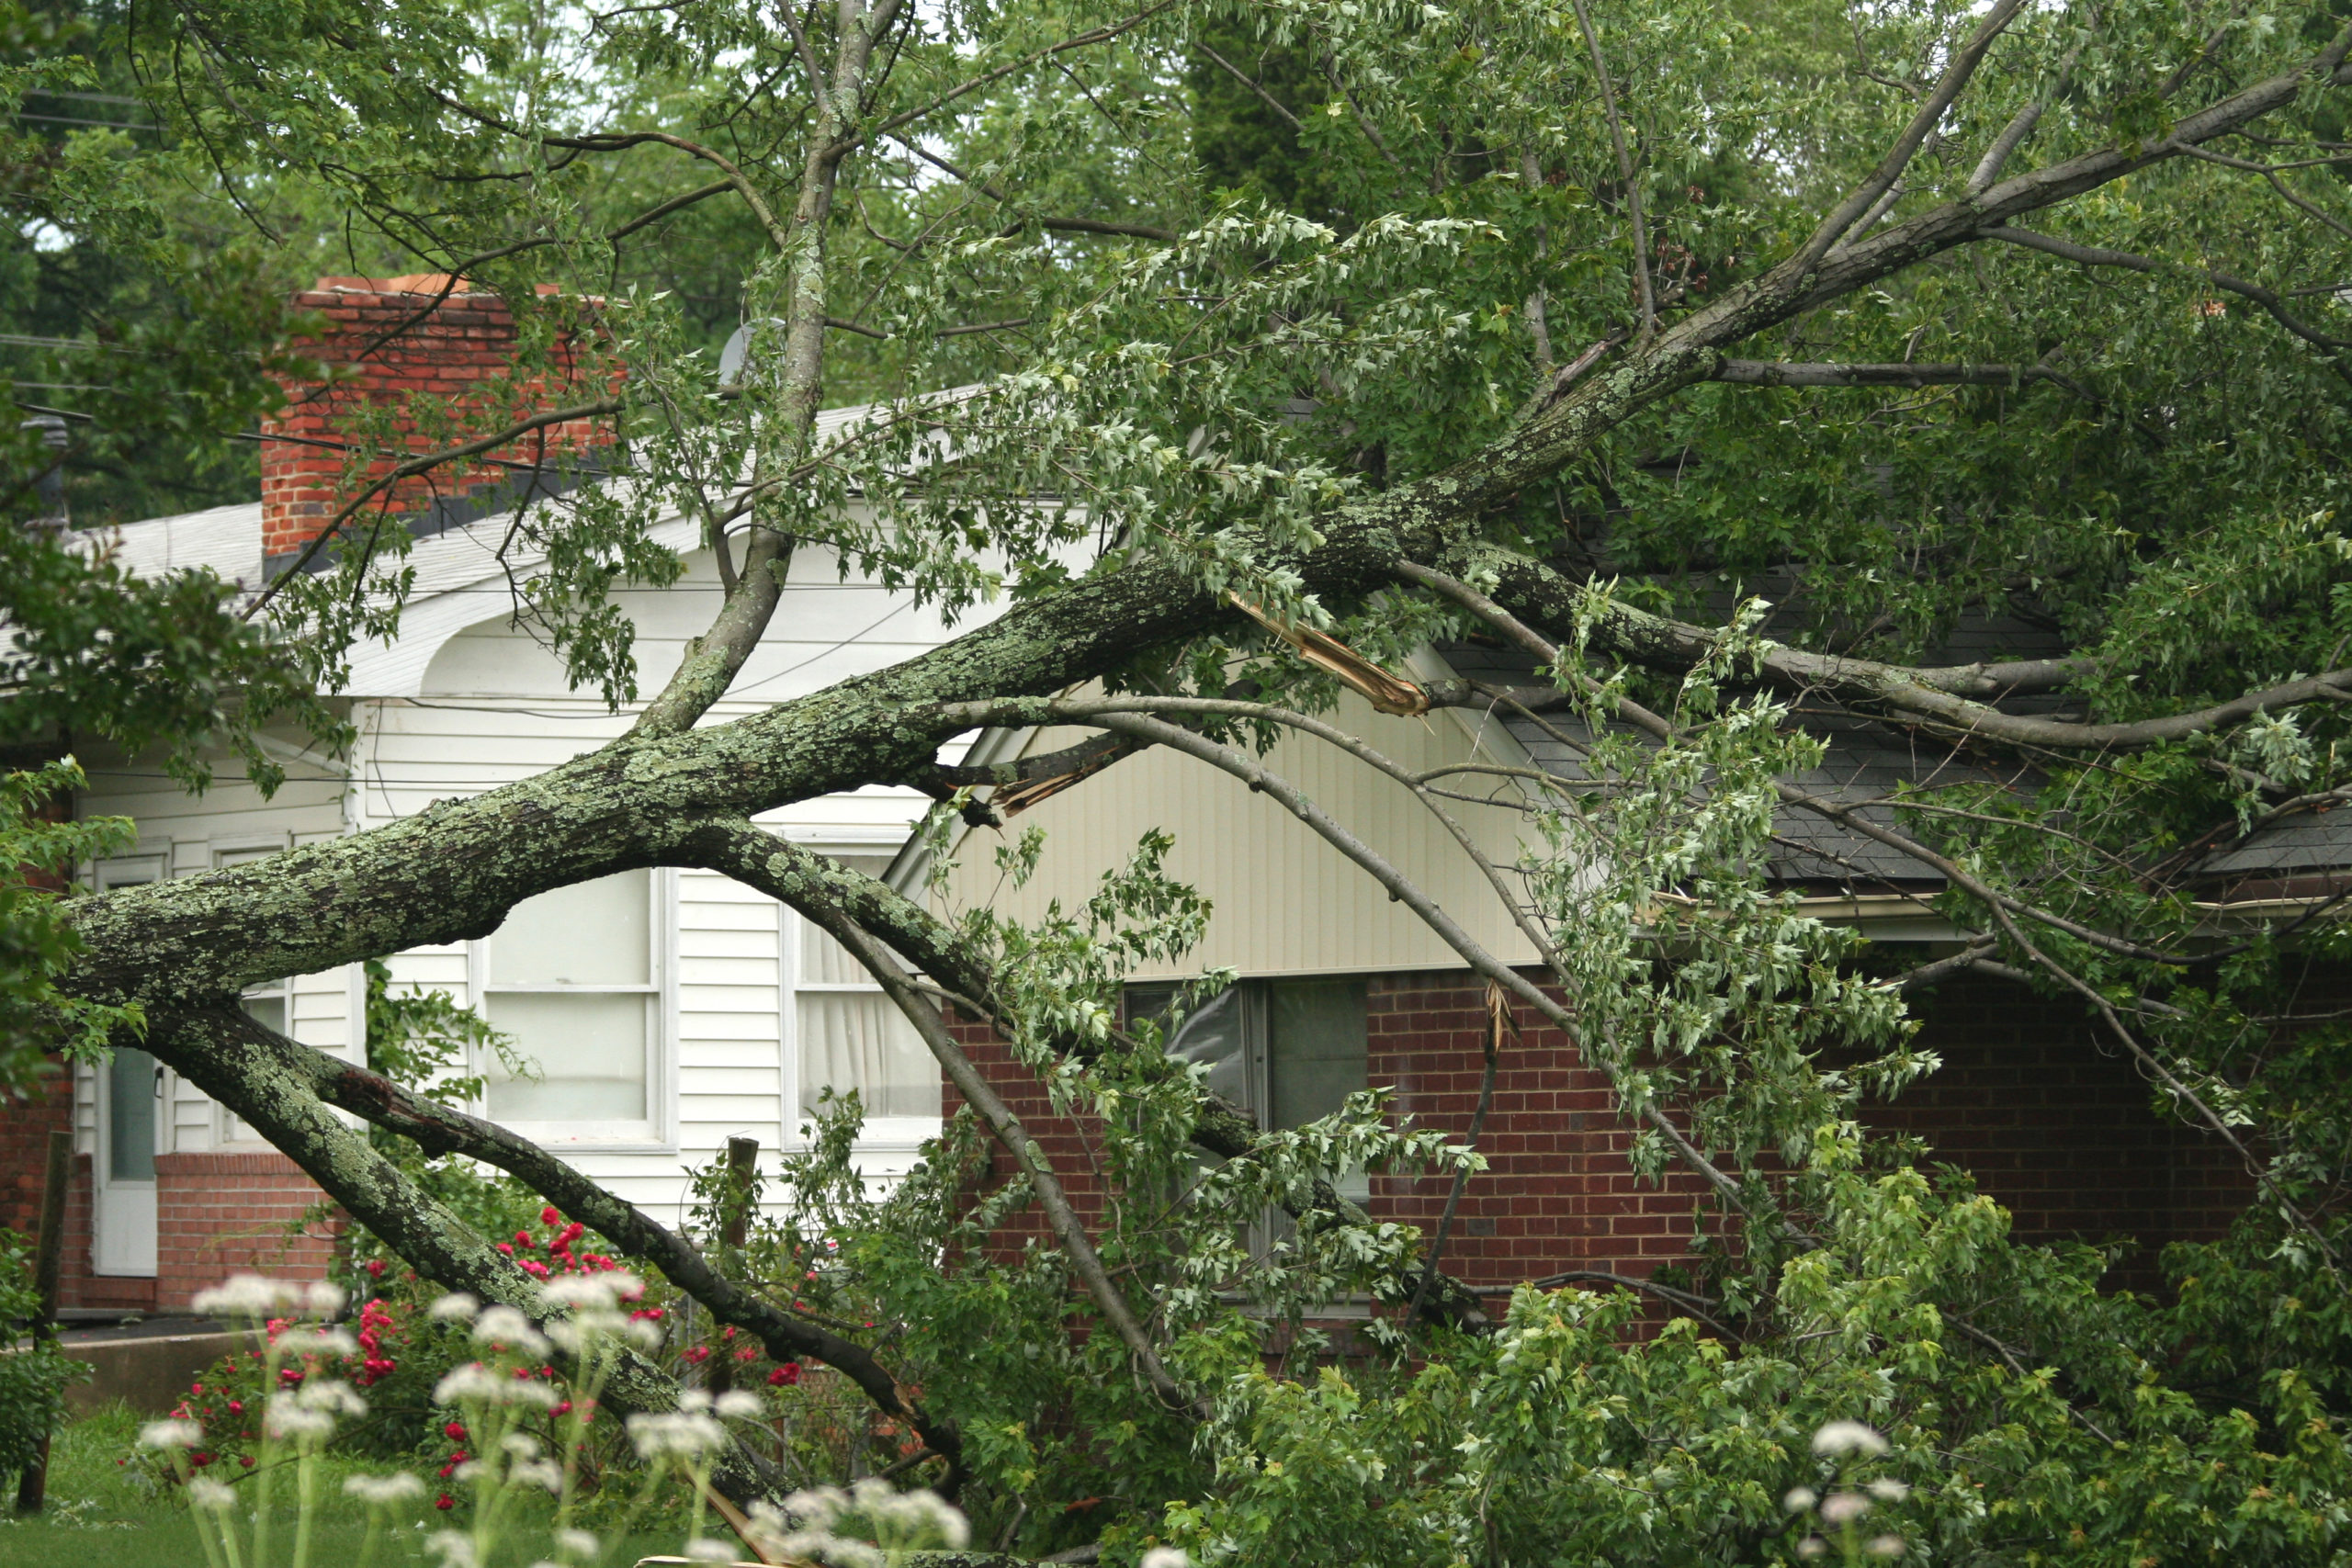 what happens if a tree falls on the property next door; image shows tree fell on someone else's property